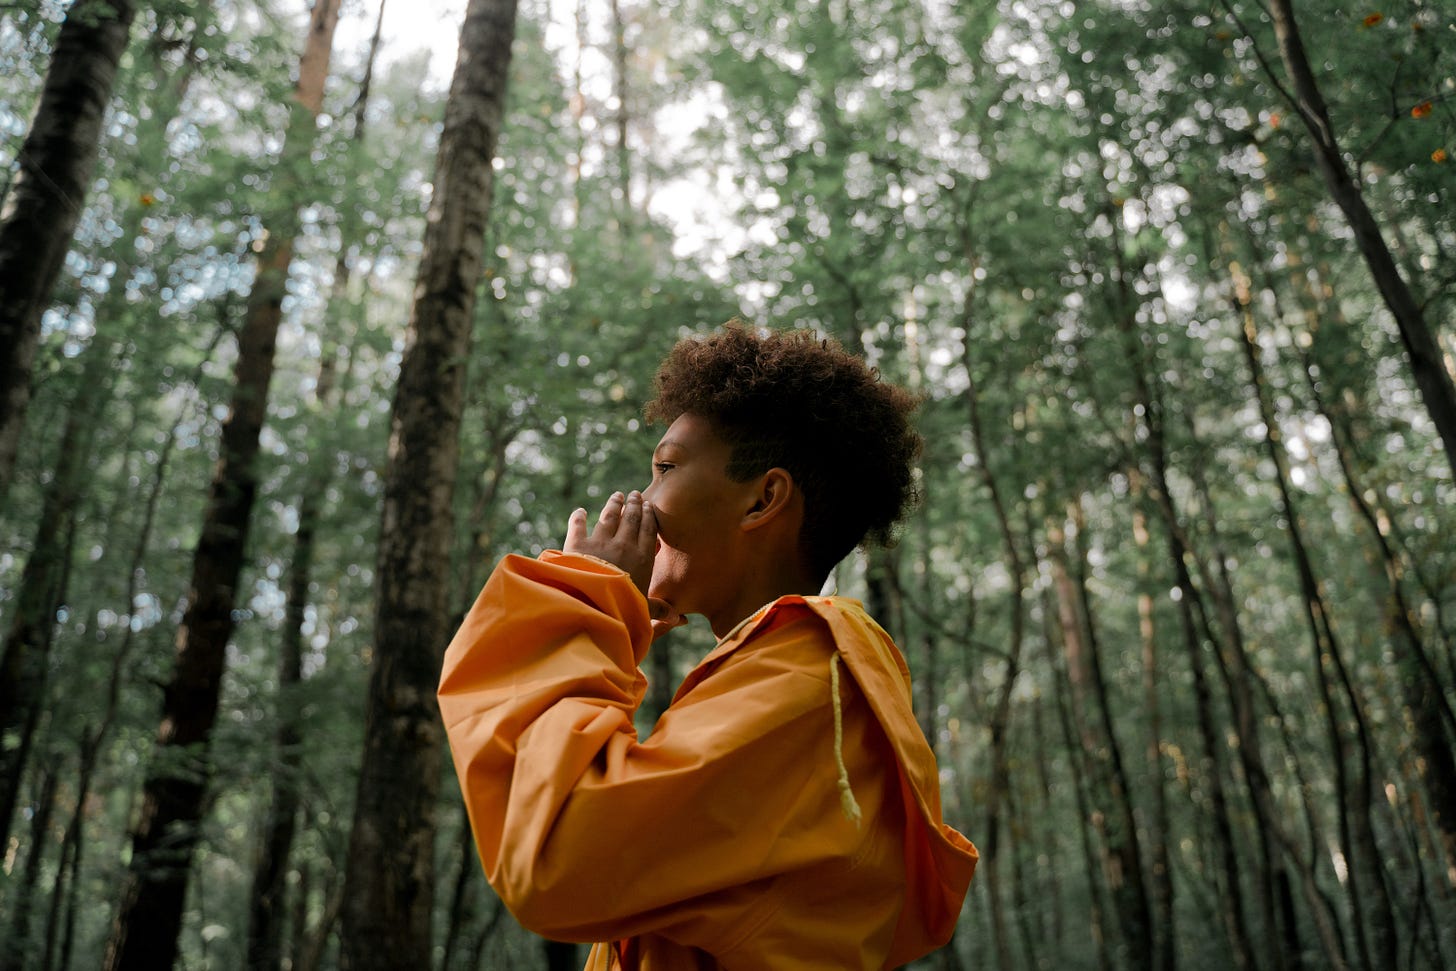 A boy in a yellow jacket shouting in a forest.